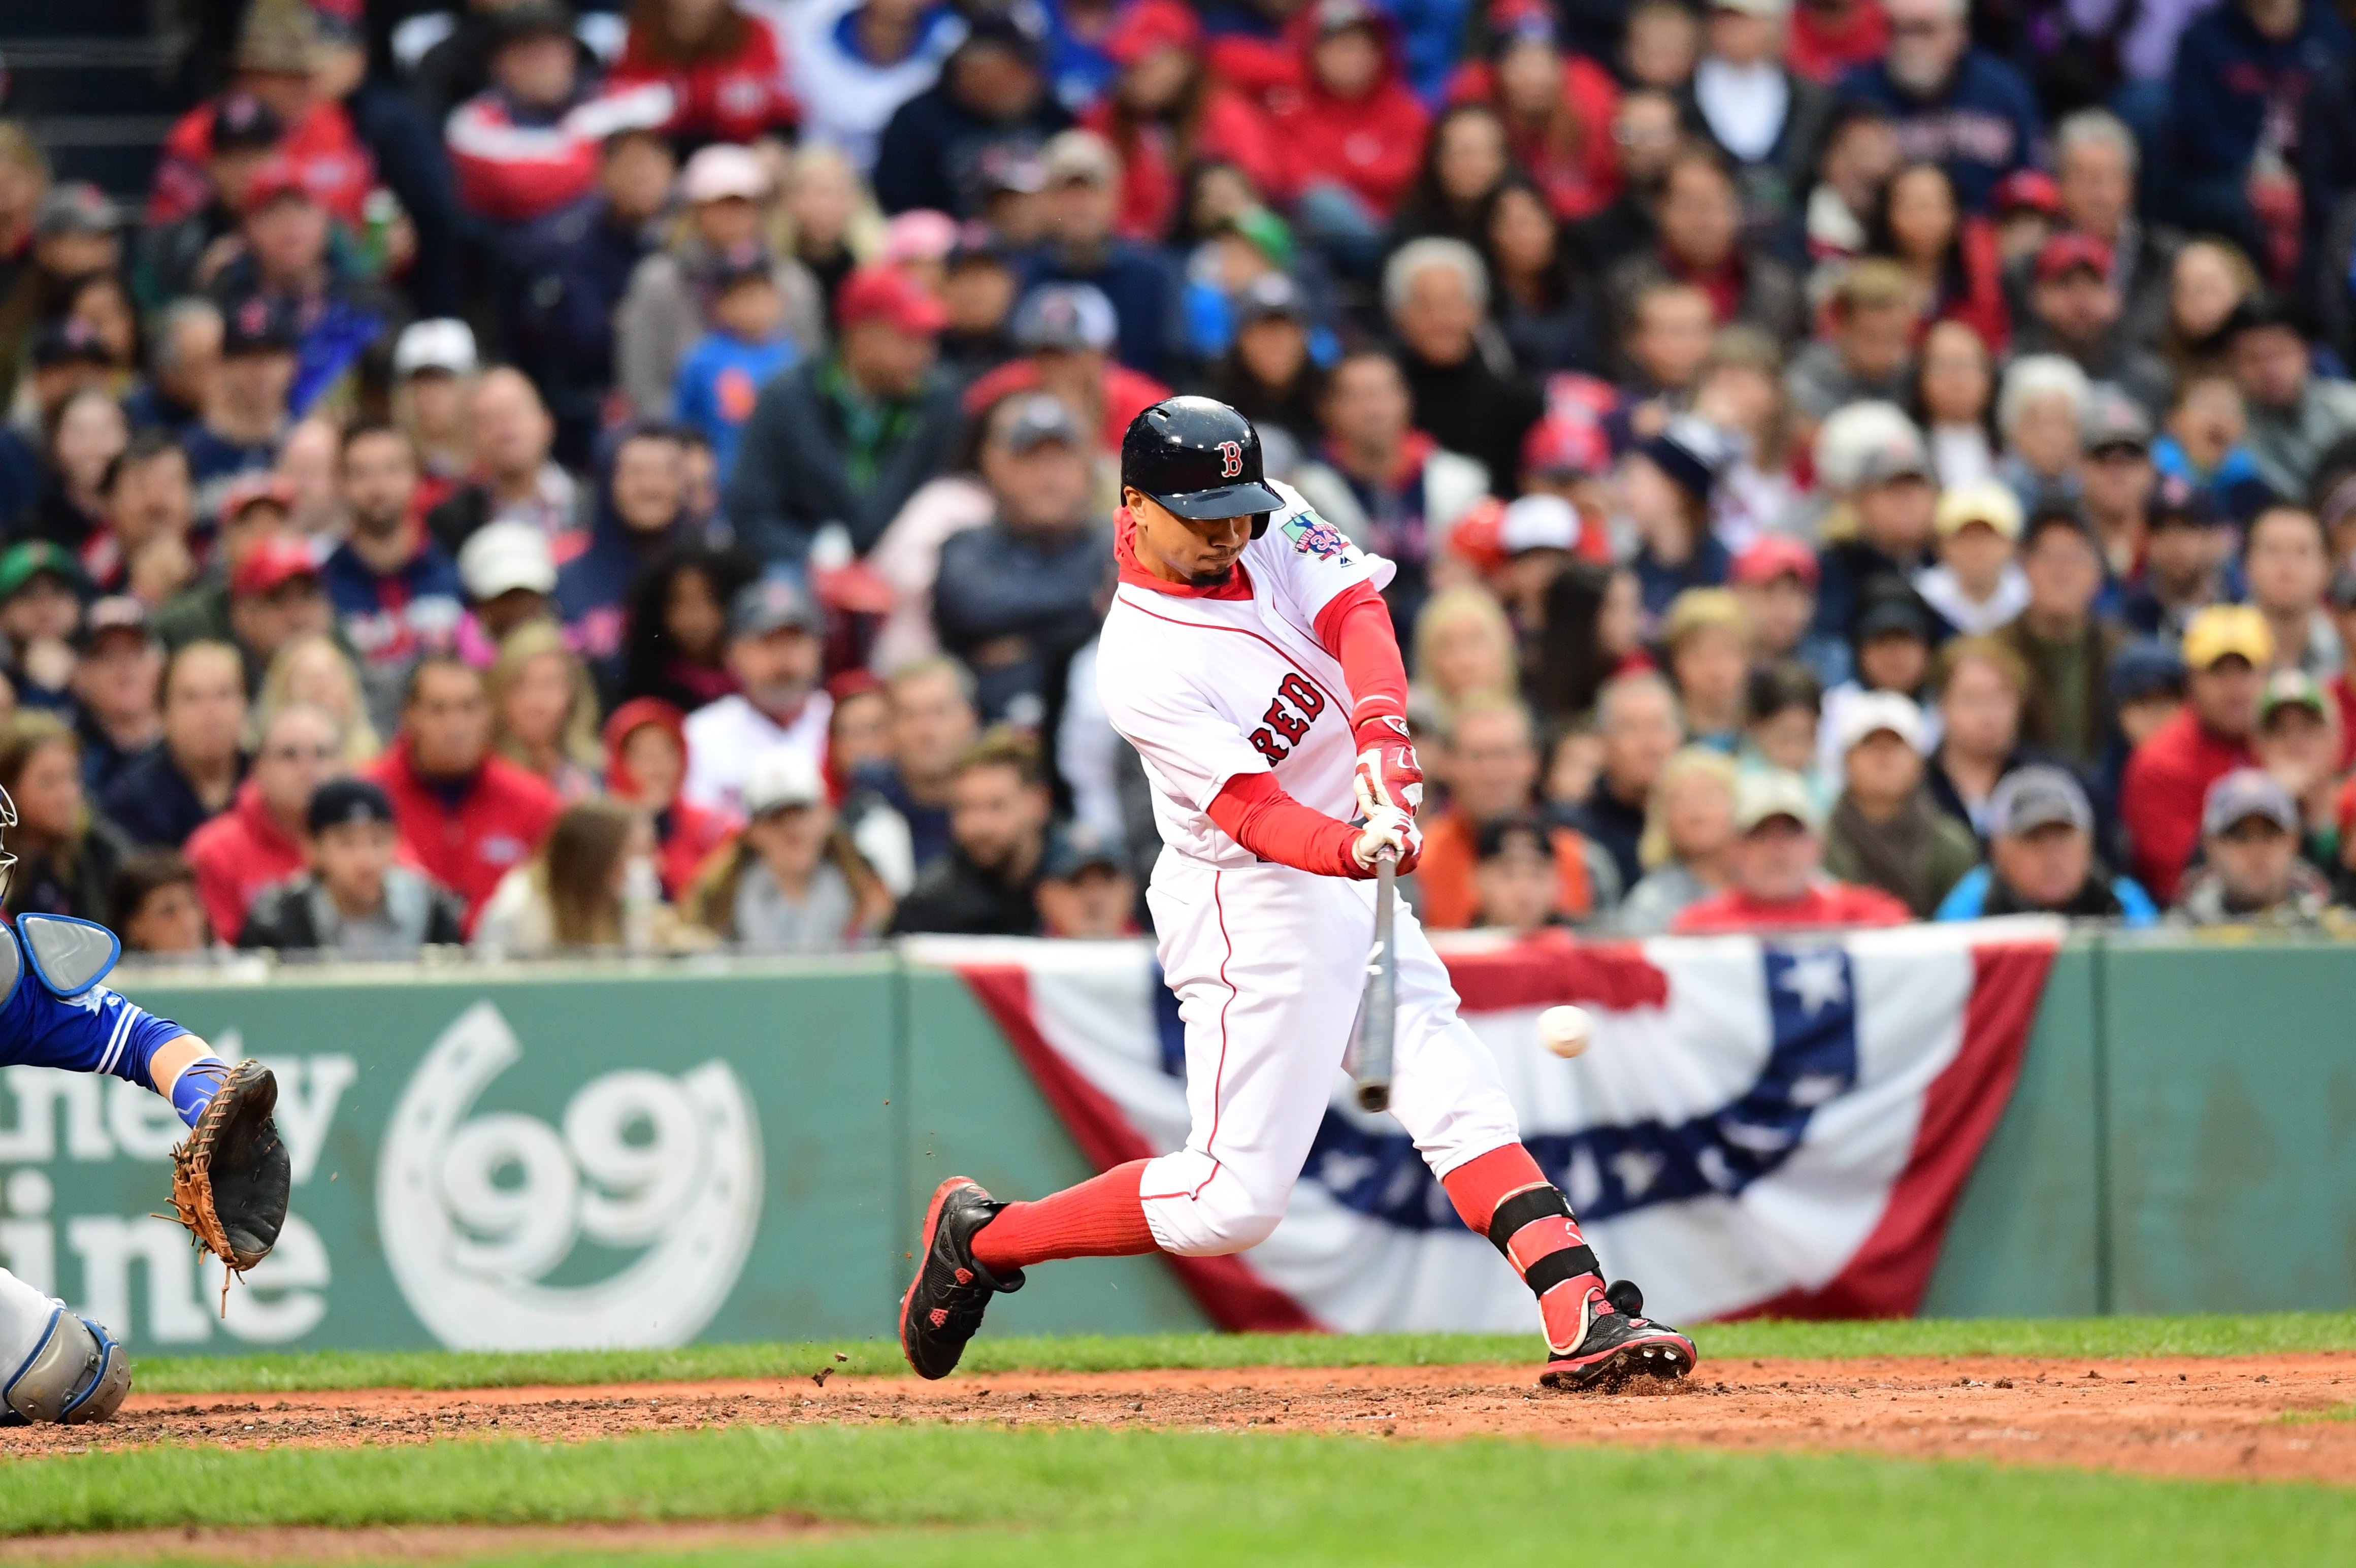 Boston Red Sox Games Can Now Be Streamed Through NESN